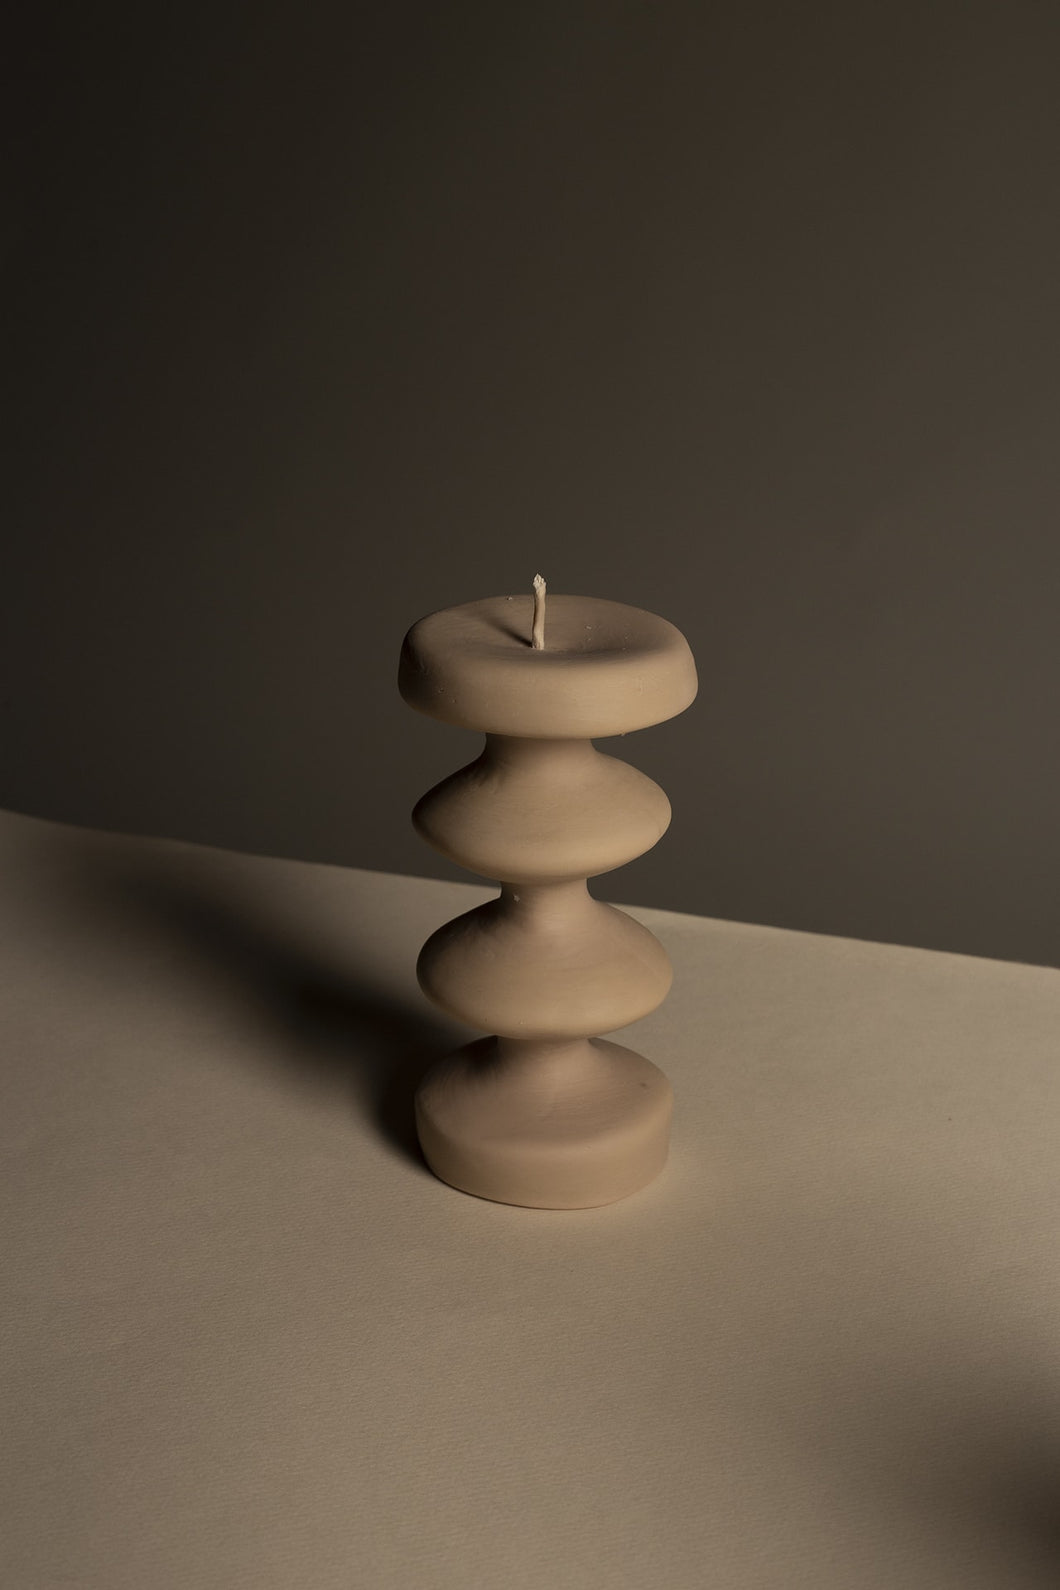 Big Mutatio Gray Sculptural Art Candle Handmade By Mulier Studio. Hand Sculpted Wax Decorative Curvy Totem Pillar Candle Exclusively on INK + PORCELAIN. Artful Objects Designed by Women